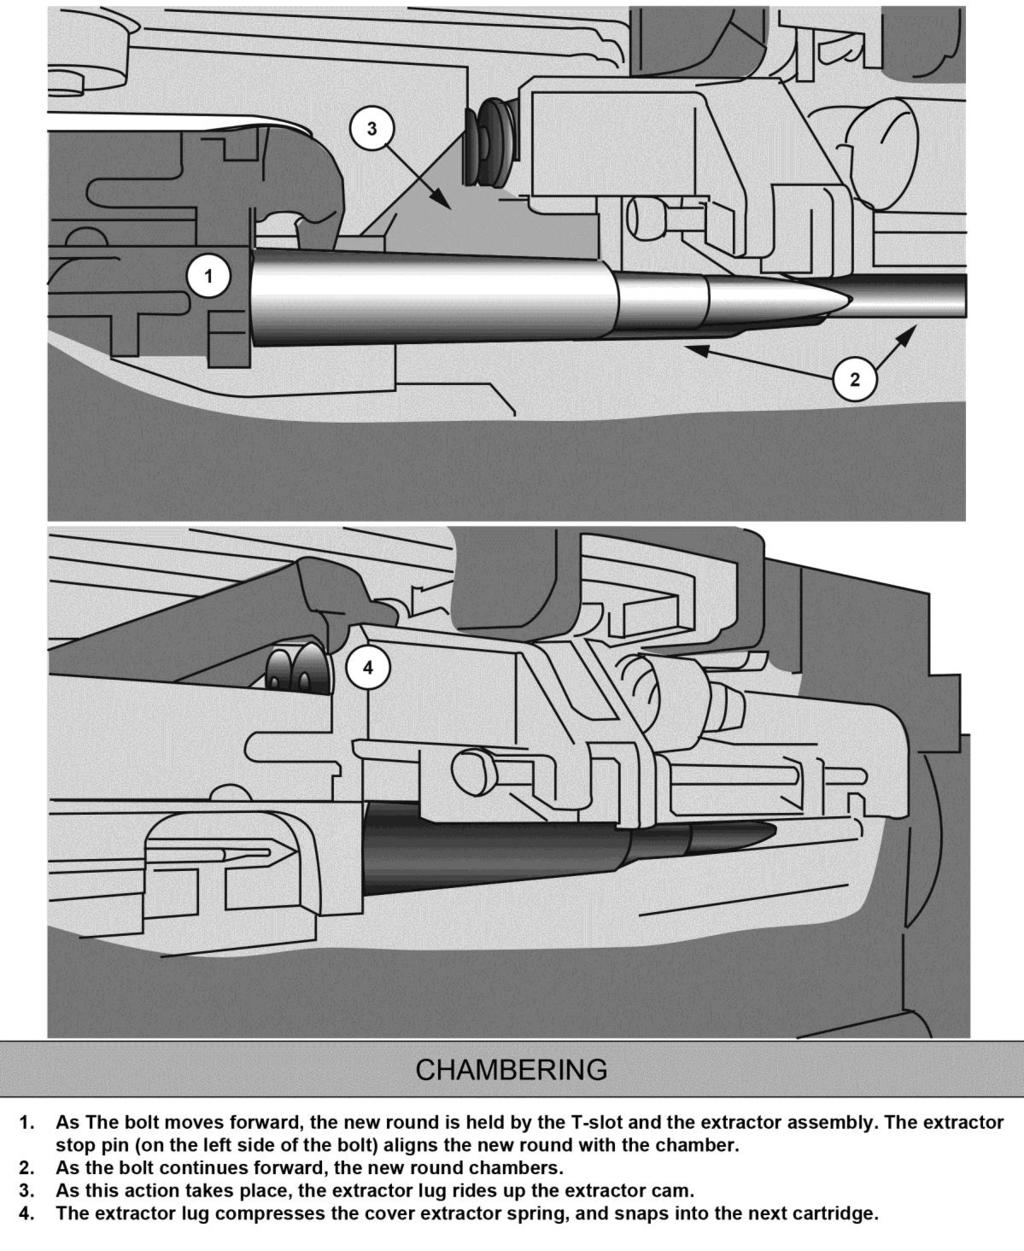 Principles of Operation CHAMBERING 2-19. As the bolt moves forward, the new round is held by the T-slot and the extractor assembly.